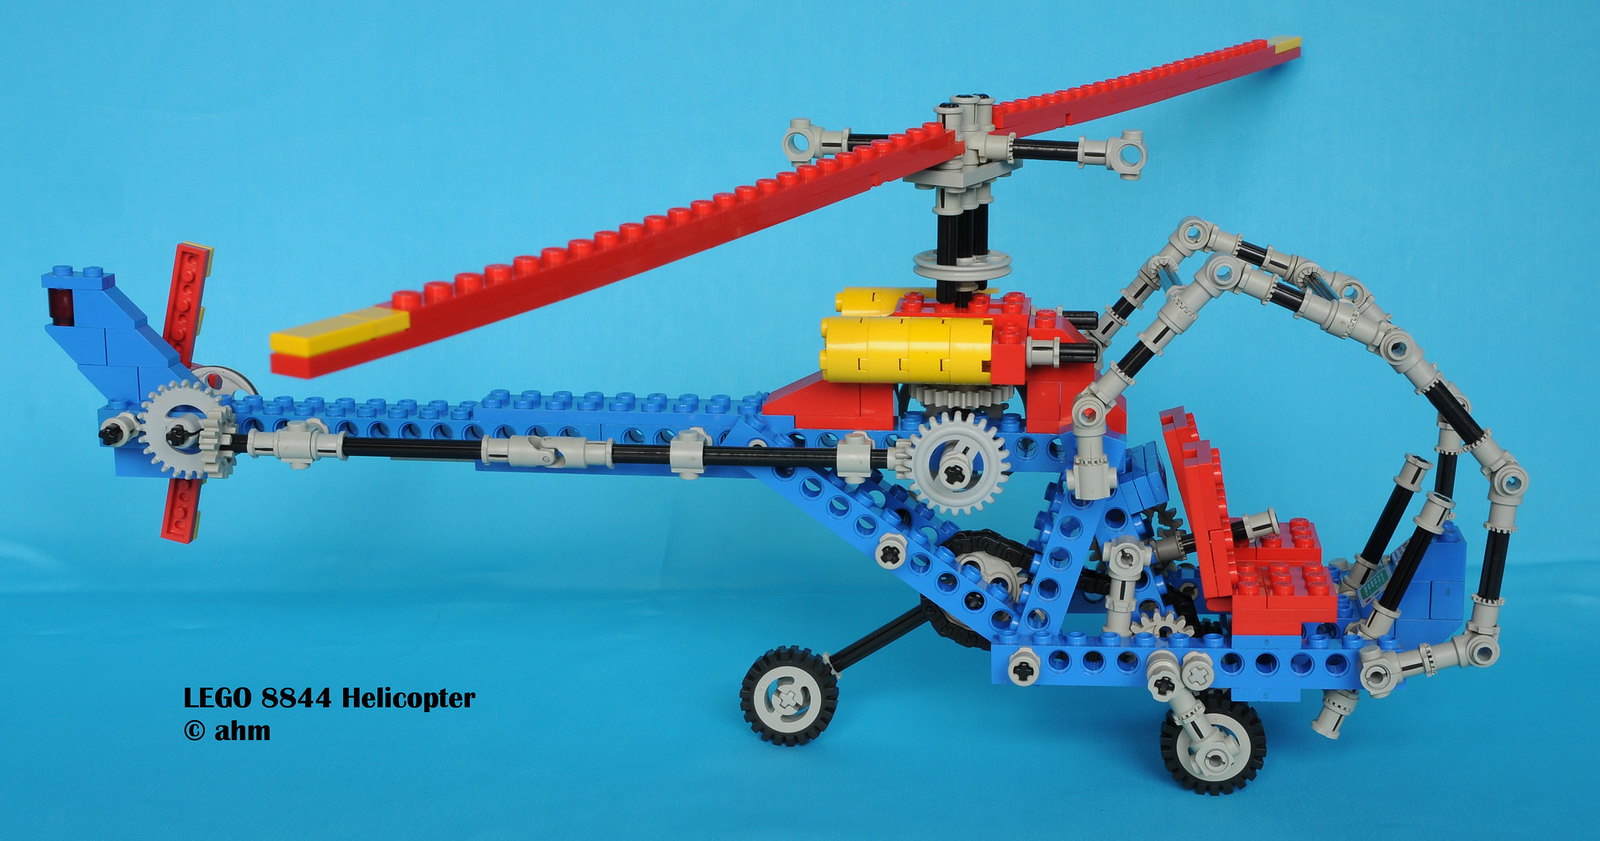 LEGO Helicopter | LEGO 8844 Helicopter Technic 1981 | Hamid | Flickr